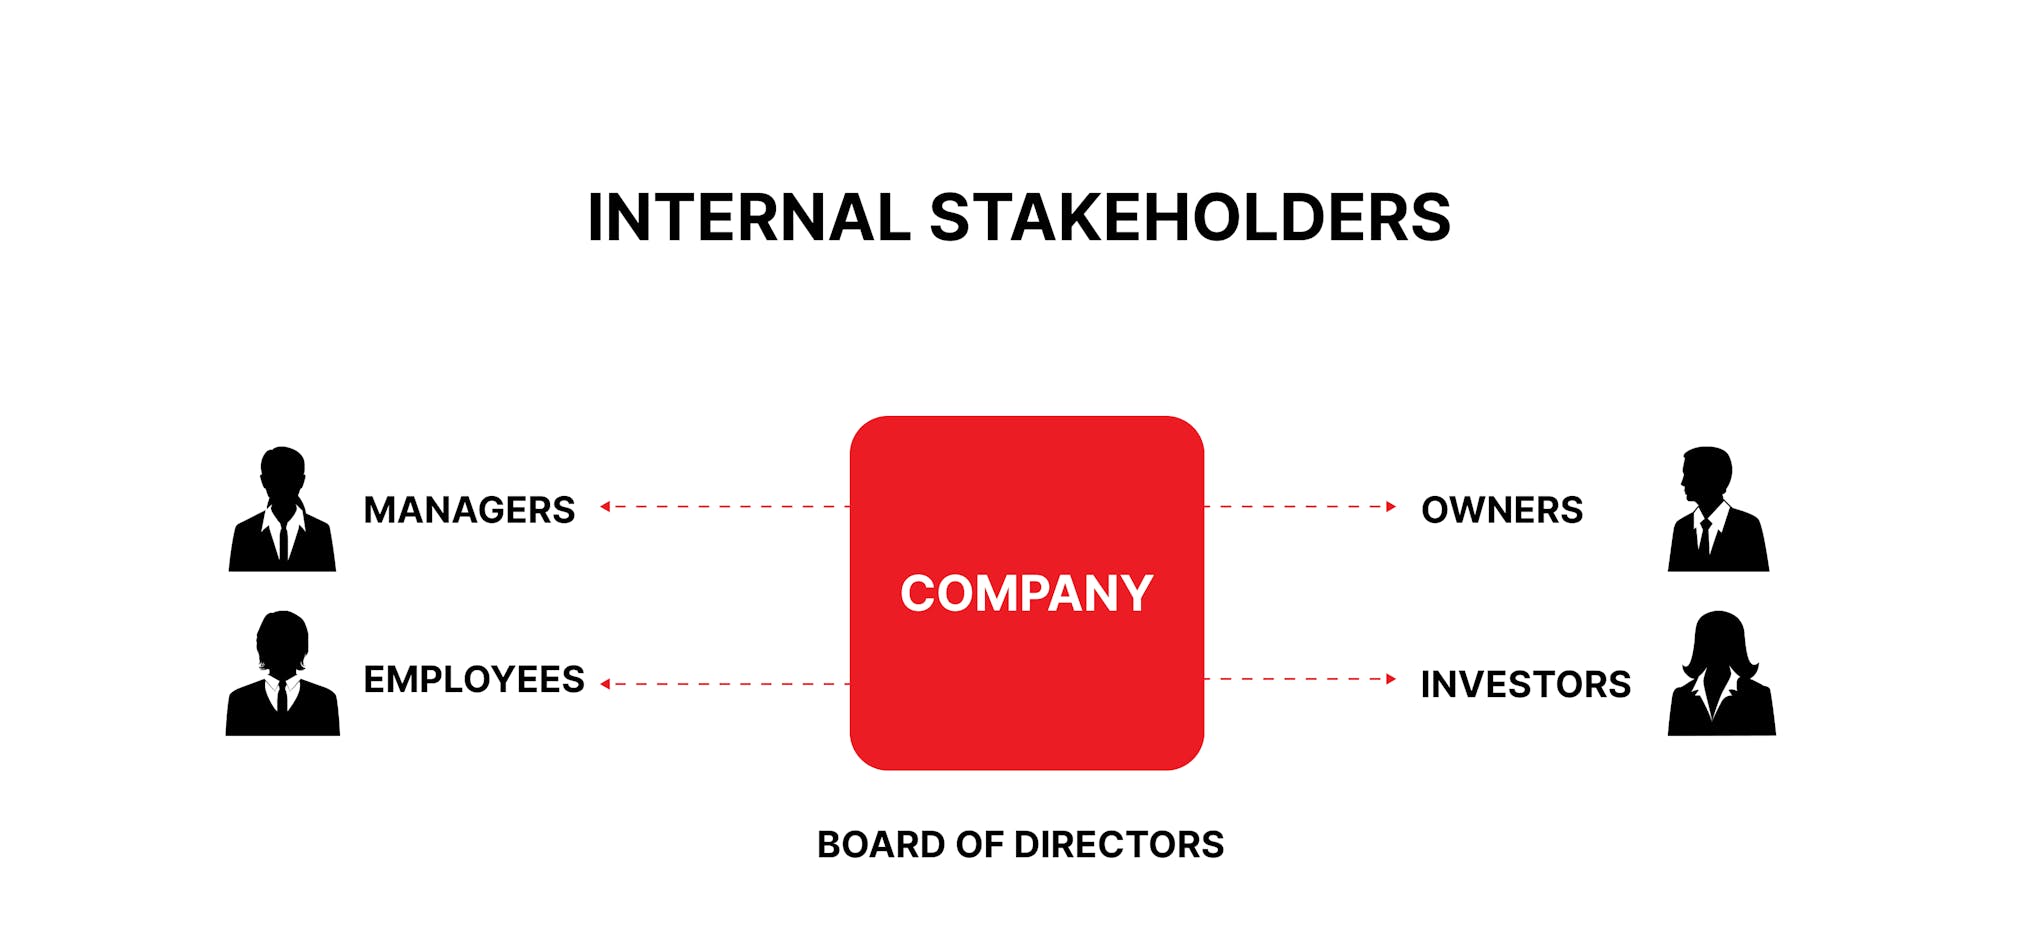 What are the internal stakeholders